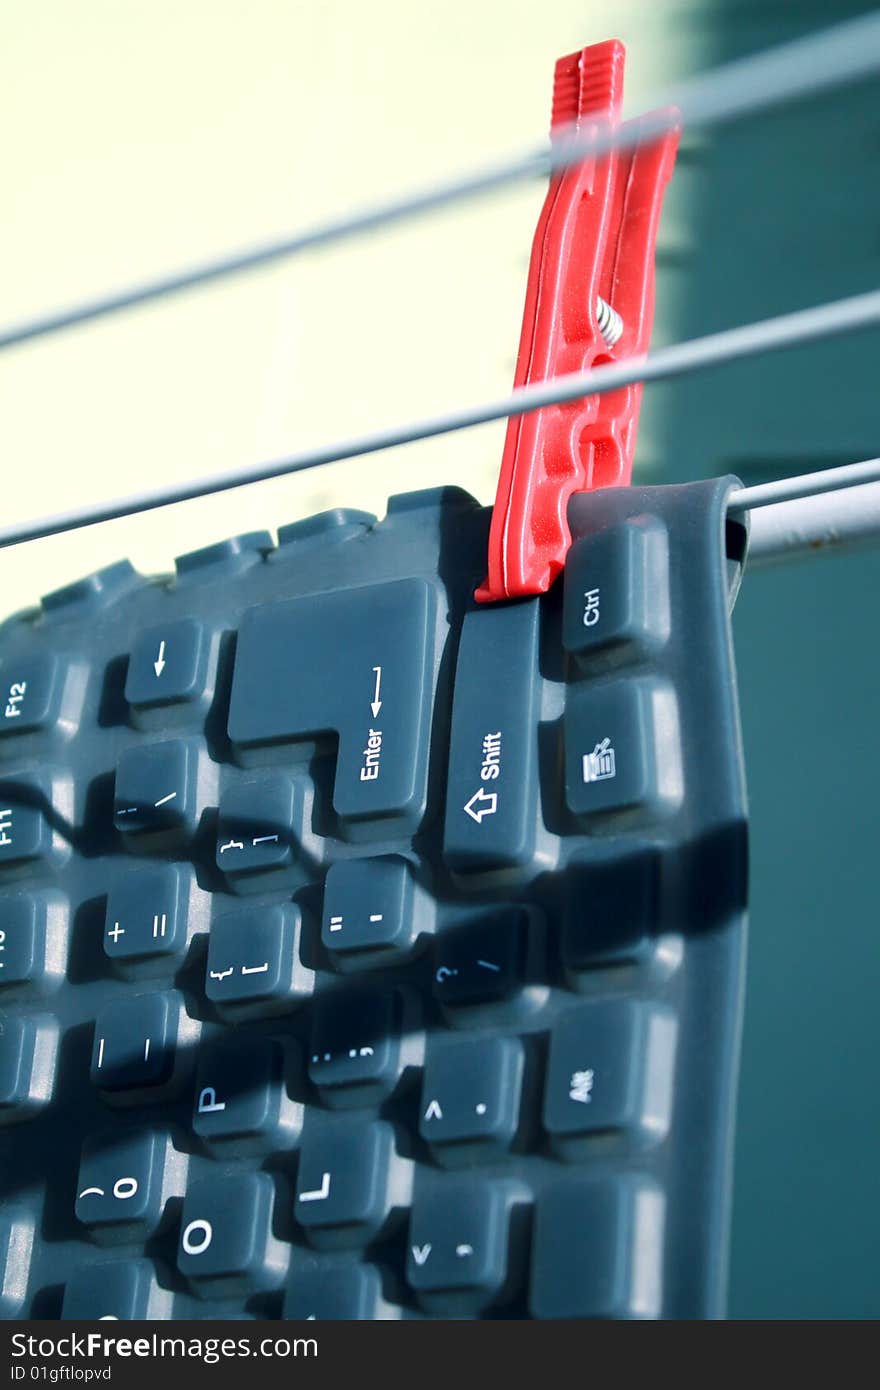 Flexible keyboard on clothesline with a red peg. Flexible keyboard on clothesline with a red peg